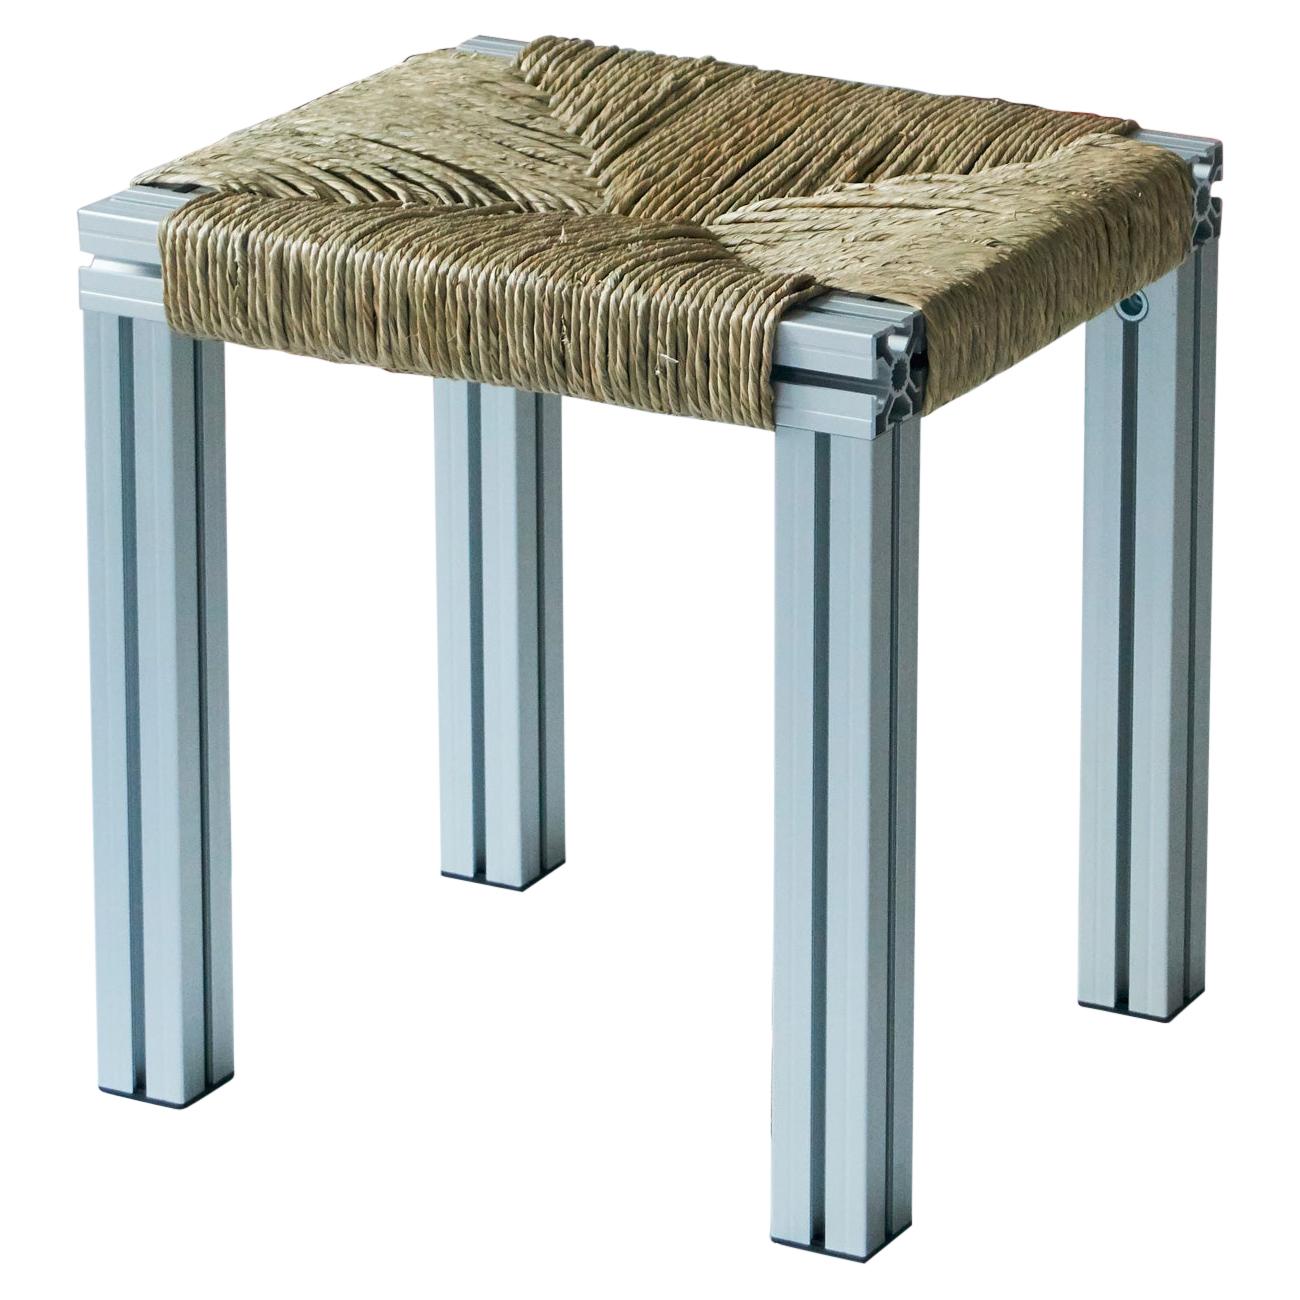 Grey Aluminium Stool with Reel Rush Seating from Anodised Wicker Collection For Sale